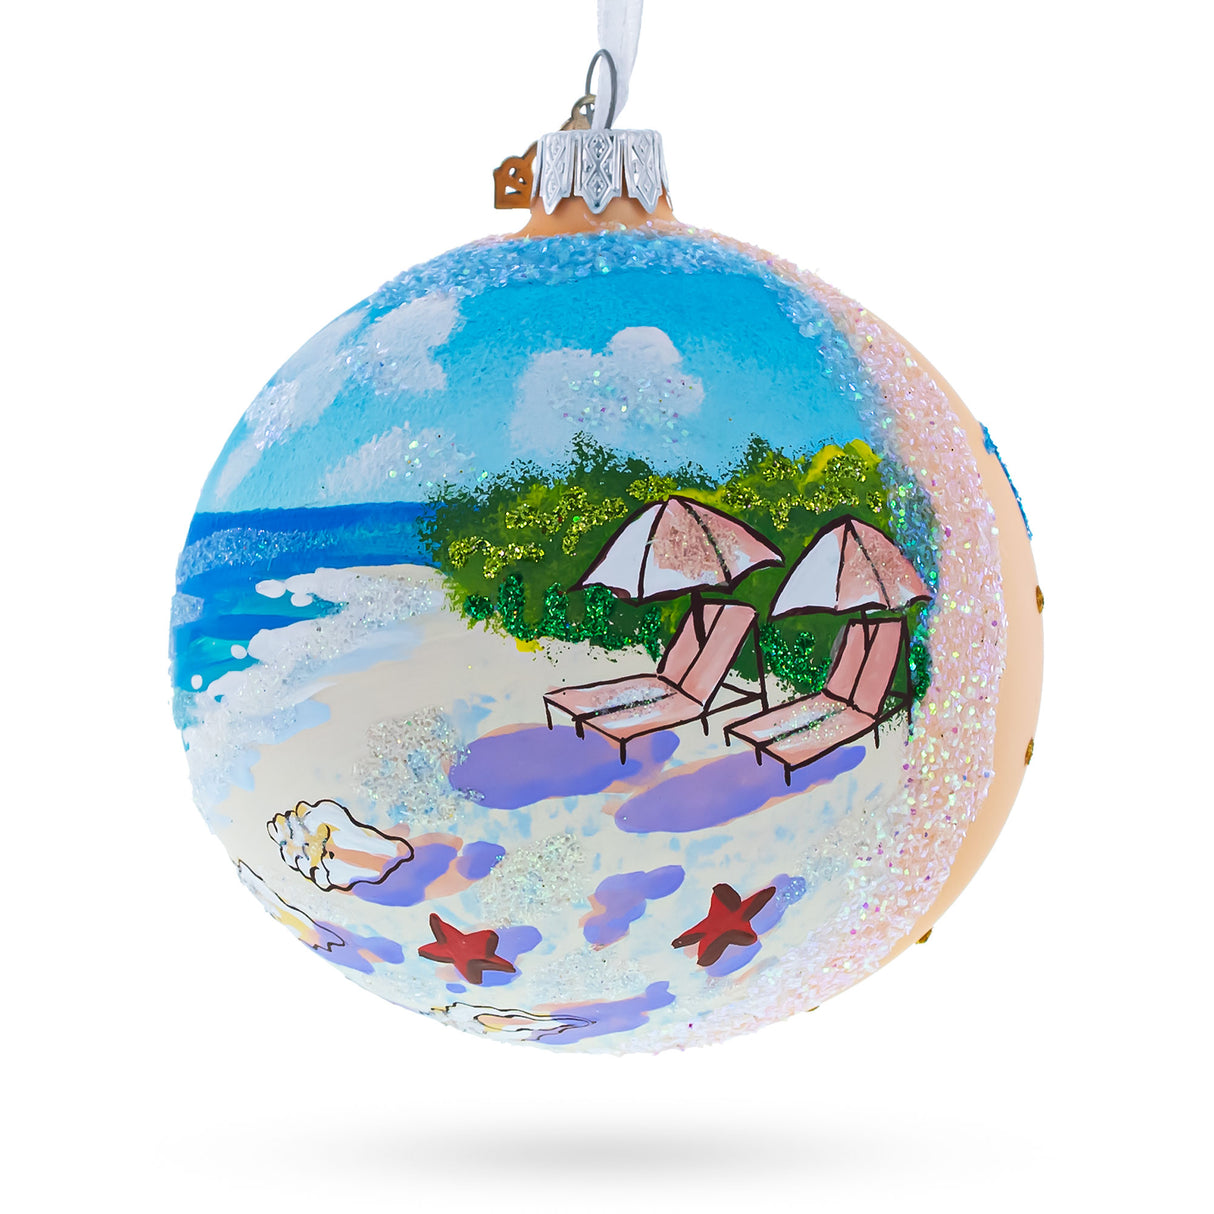 Buy Christmas Ornaments Travel North America Turks and Caicos by BestPysanky Online Gift Ship